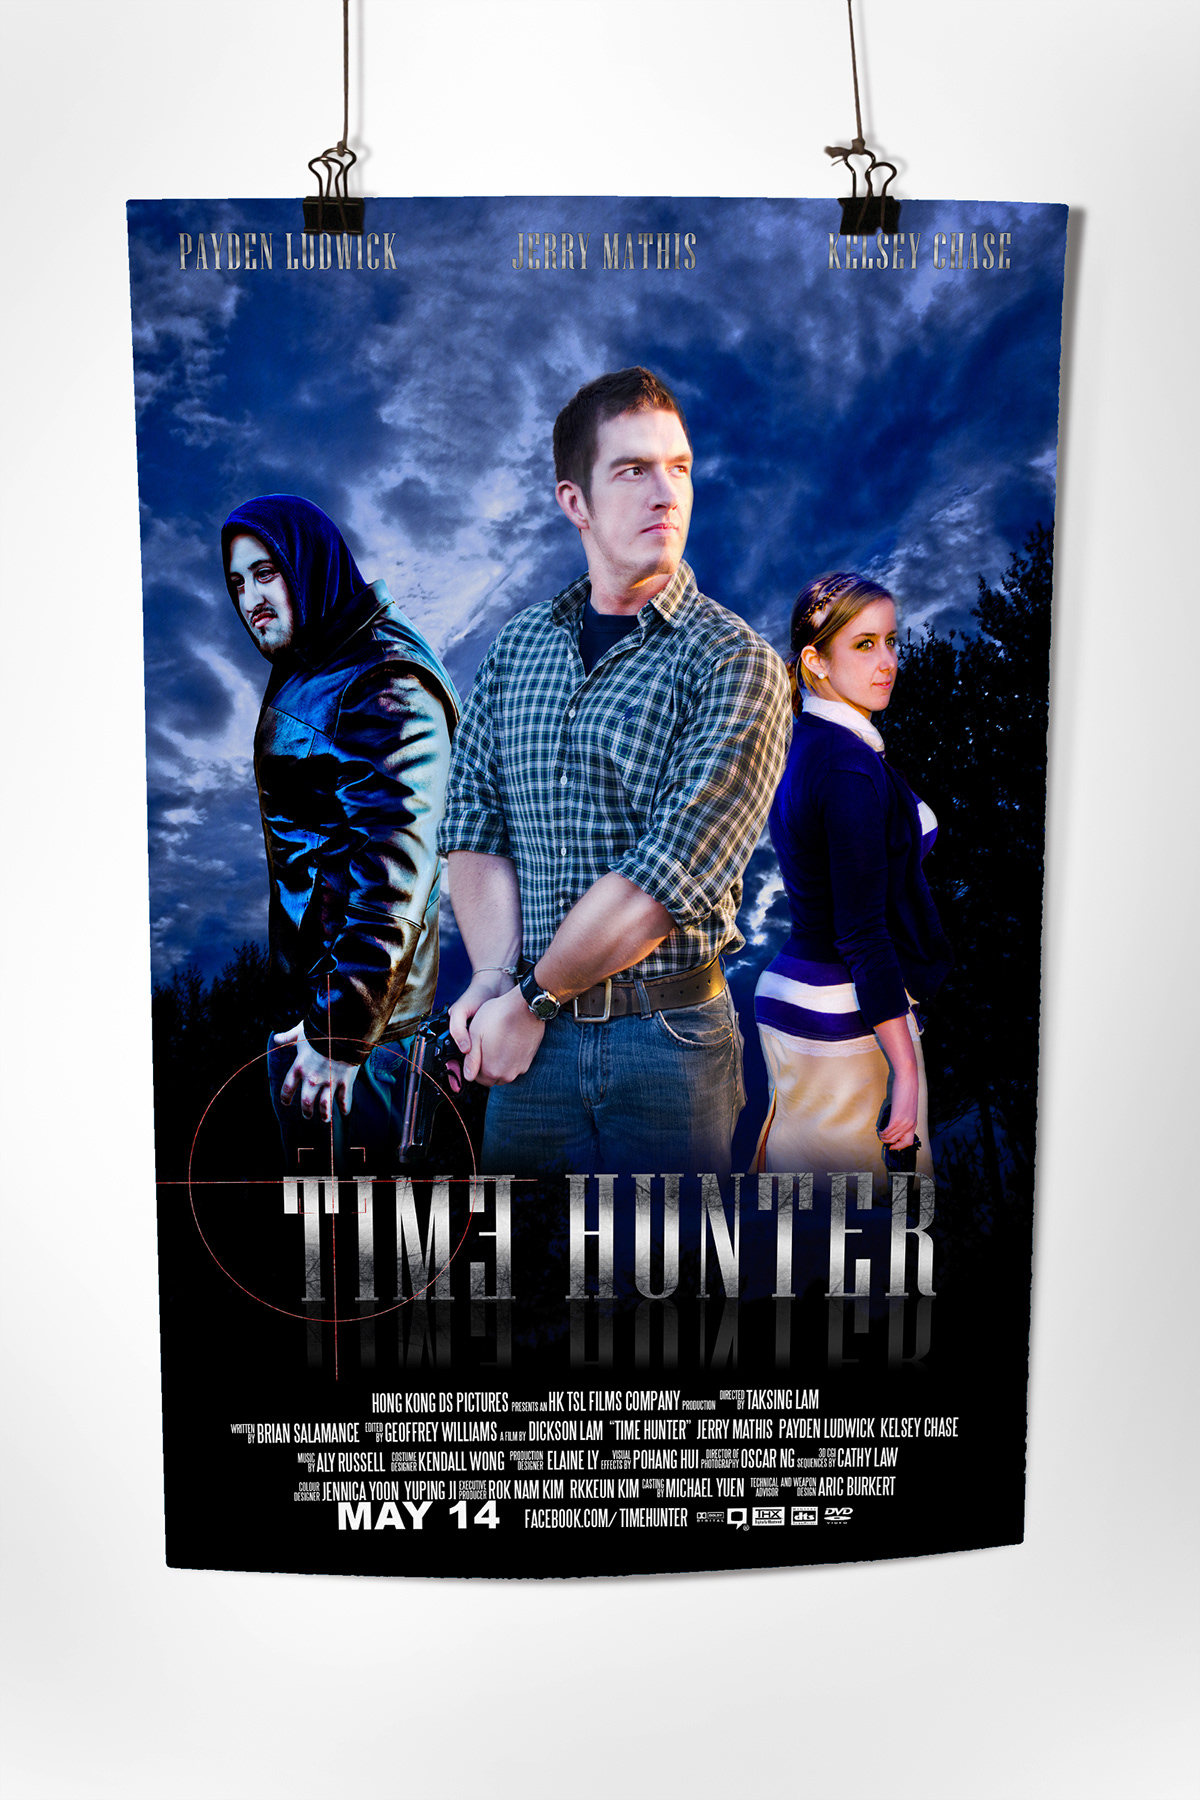 Scifi movie poster photoshop time hunter